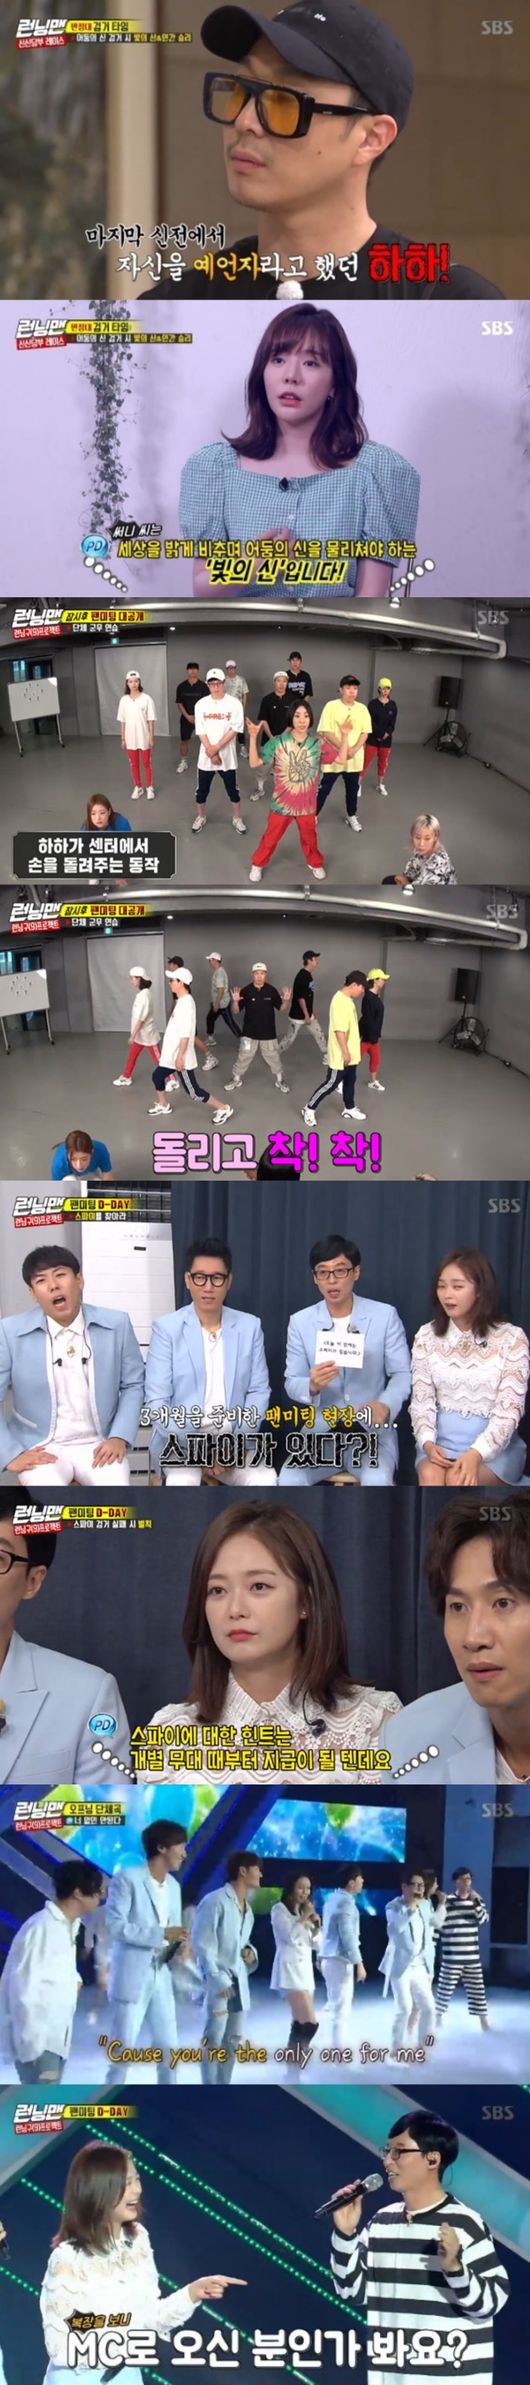 SBS entertainment program Running Man first unveiled The long-awaiteds 9th anniversary fan meeting T-Shirt, soaring to 7.8% of the highest audience rating per minute, ranking first in the same time zone of 2049 target audience rating.According to Nielsen Korea, the ratings agency, Running Man, which aired on the 8th, recorded 3.2% of the 2049 target audience rating, which is an important indicator of major advertising officials, which was higher than last week (based on the second part of the audience rating of households in the metropolitan area), maintaining the top spot in the same time zone, surpassing Masked Wang and Donkey Ears.The final results of the race of the couple, Shin Shin-dang, following last week, were released on the show.Girls Generation Sunny, singer Stern, actor Kim Yewon, and Jang Yewon announcer appeared and a psychological exhibition of light god, dark god, human beings was held.The members realized that the god of darkness could be a prophet during the reasoning, and raised Haha as the god of darkness in the final judgment.Haha was the god of darkness, Sunny was the god of light, and the god of light and human team won.In addition, the first domestic fan meeting T-Shirt in Running Mans history was also released for the first time on the show.The members sweated to show group dance and couple dance to be presented at fan meetings, and they felt a great burden.Eventually, the day came, and the members greeted 2,500 fans.But for a moment everyone was happy to see the crew released a mission to find Spy. The members were embarrassed to say that they had to find Spy as well as stage performances.Audiences were aware of Spys Identity, and the crew said they offer individual hints with the audiences shouts.On the other hand, the opening of T-Shirt was decorated Running Man.Through the opening mission, Yo Jae-Sukman appeared on stage wearing prison uniforms, and the rest of the members dressed up in wonderful opening costumes and performed the opening performance of No You.The scene recorded the highest audience rating of 7.8% per minute, accounting for the best one minute.Fans were greeted with enthusiastic cheers, and Ji Suk-jin announced the start of T-Shirt with a unique official slogan called Race Start.SBS